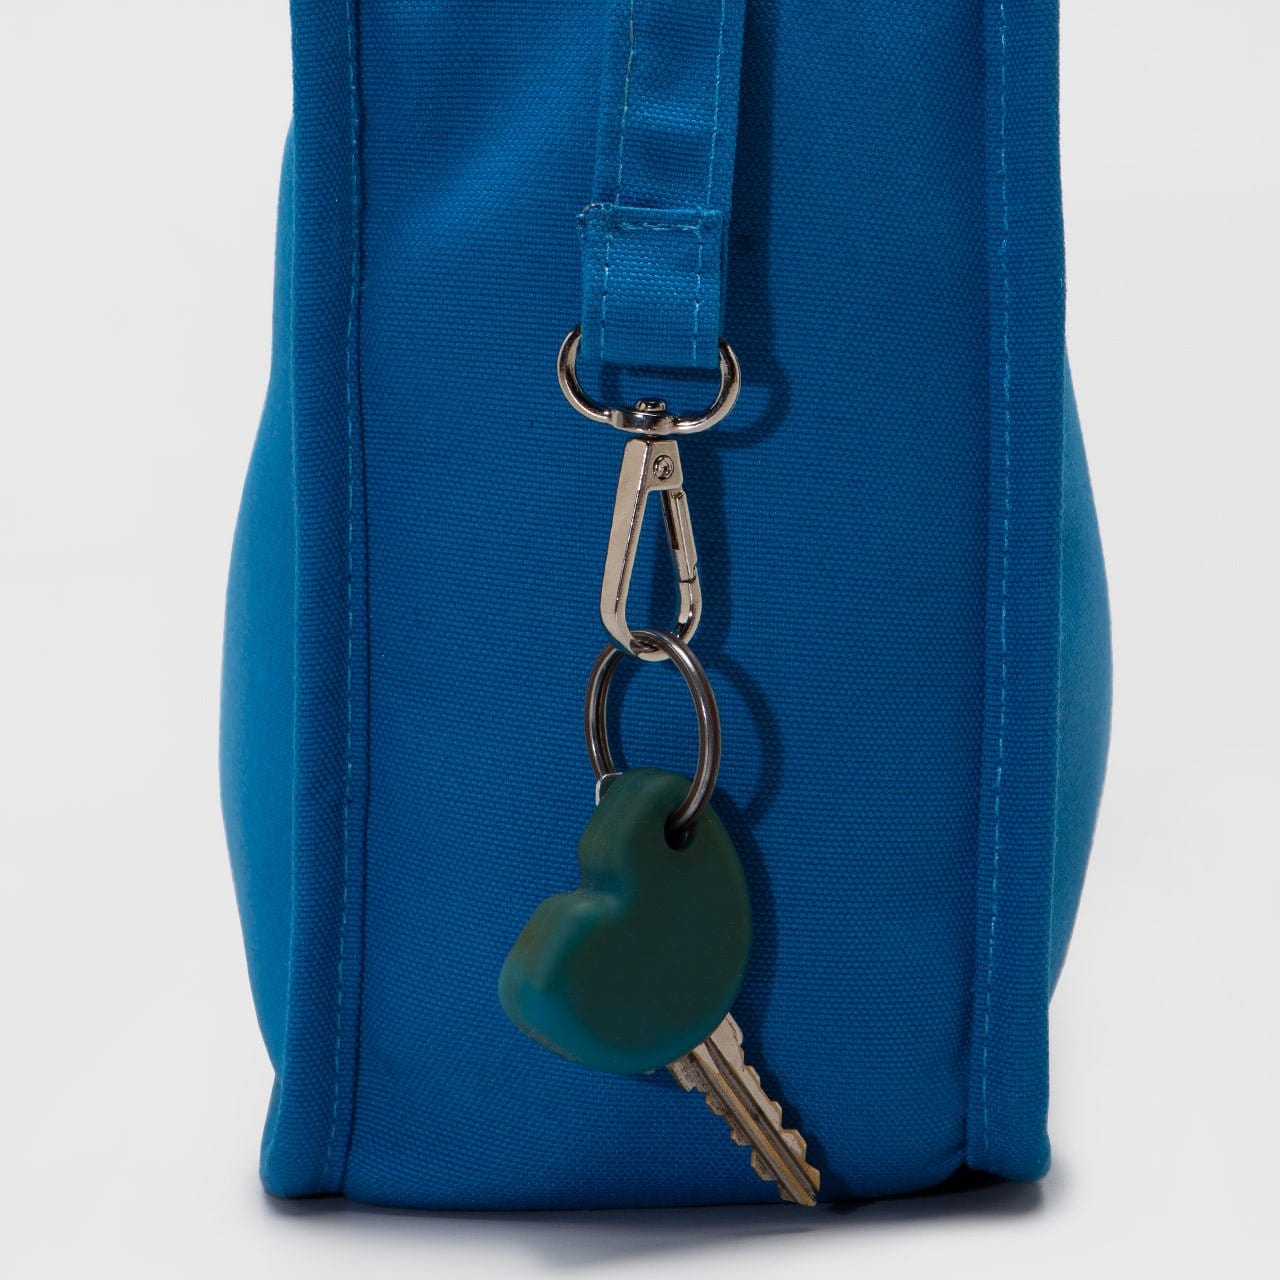 Adorable Projects Official Hand Bag Sardinia Bag Blue